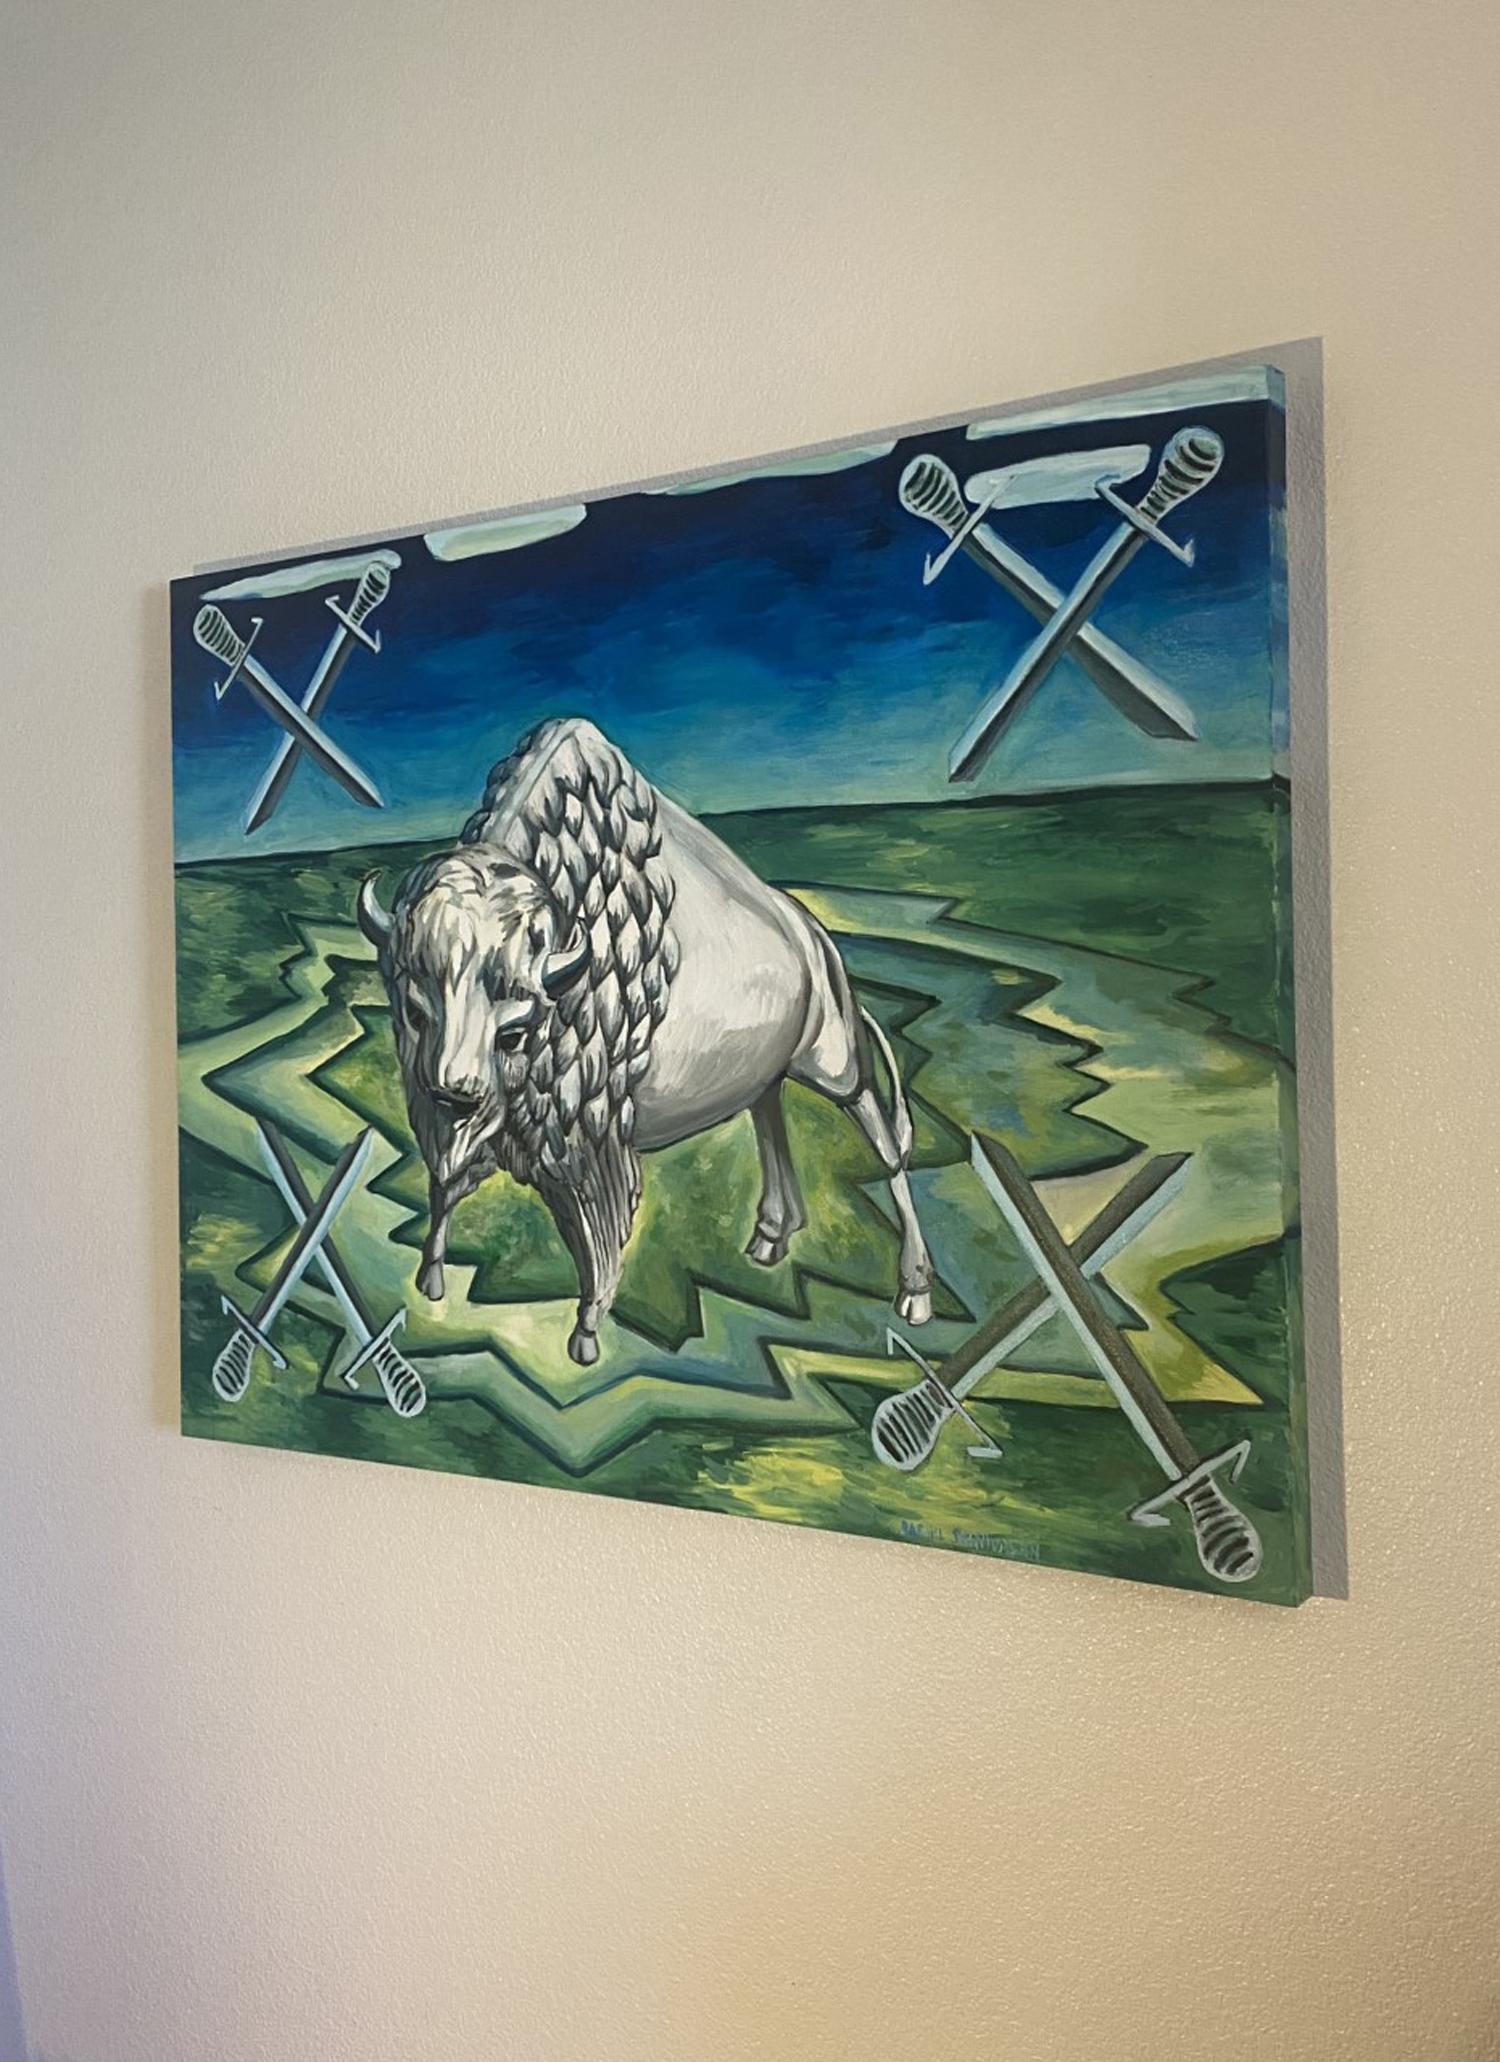 <p>Artist Comments<br />Artist Rachel Srinivasan's surrealistic piece combines the traditional symbolism of the tarot card with the image of a white bison and eight crossed swords. The creature, alone against a green expanse, represents the